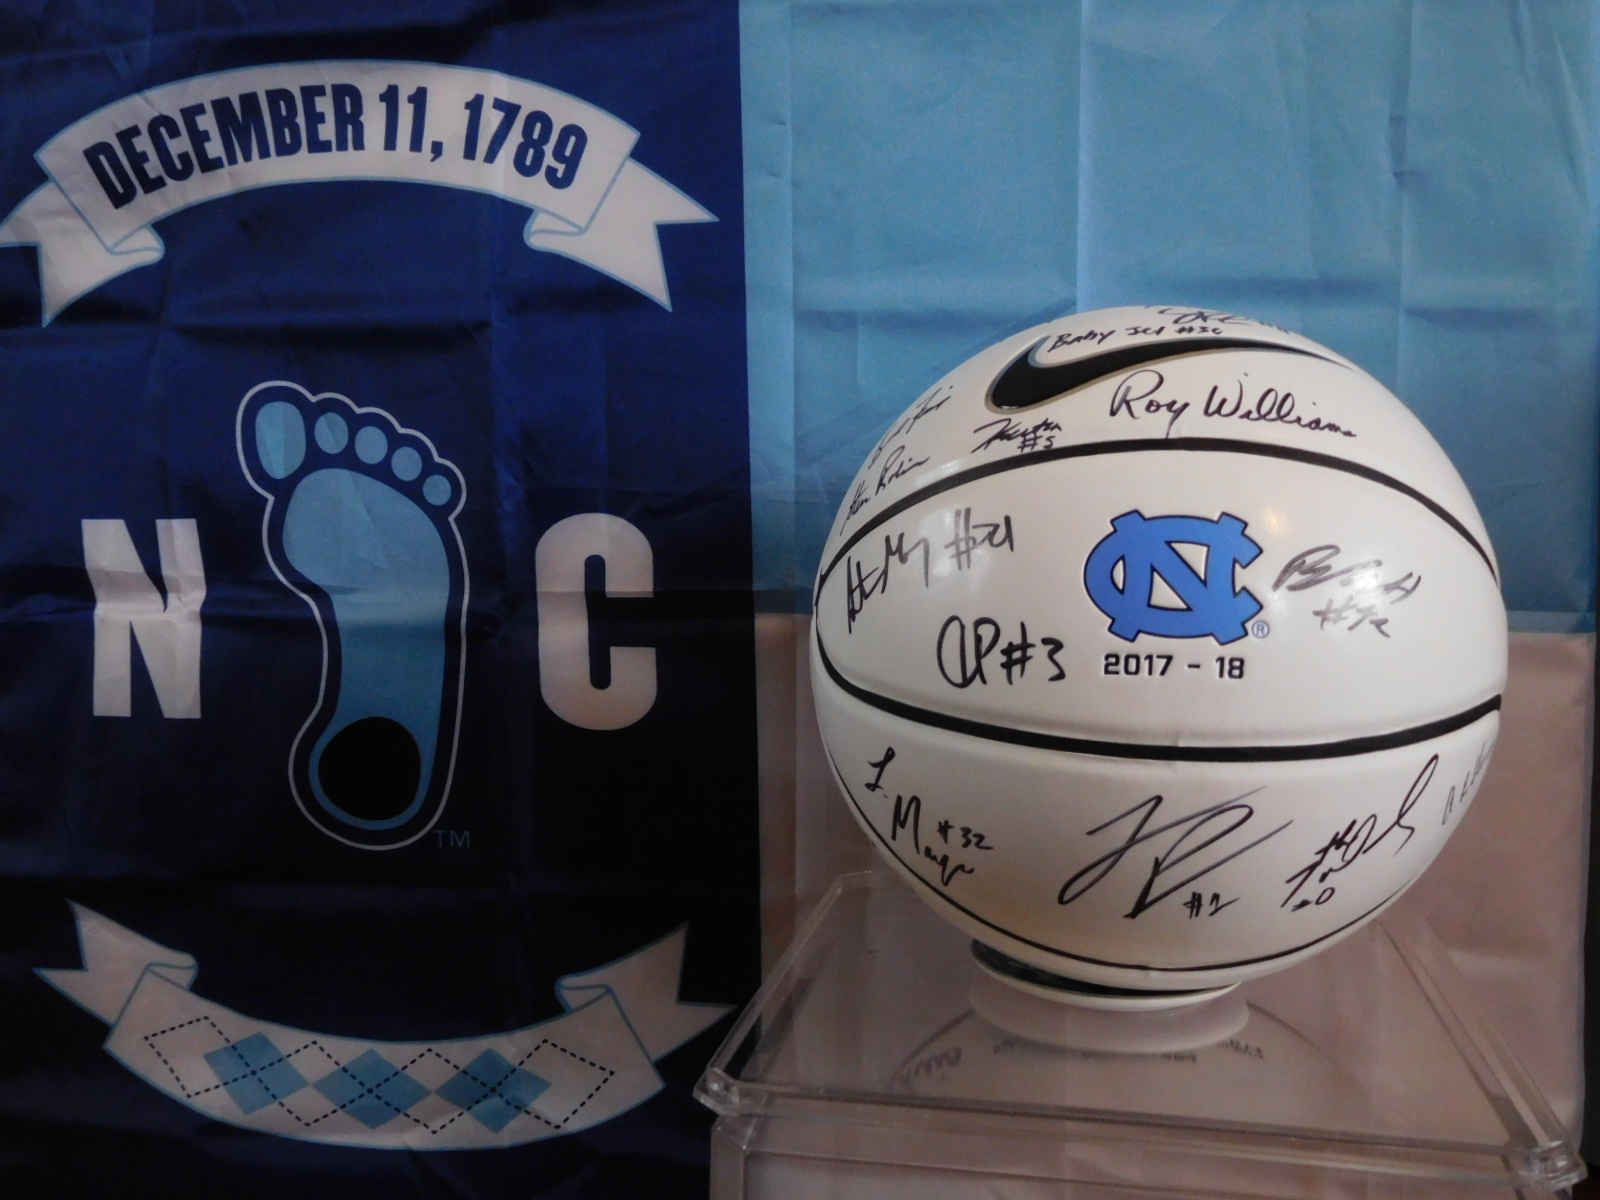 The Winner of the  2017-18 Autographed Men's Basketball Is ...